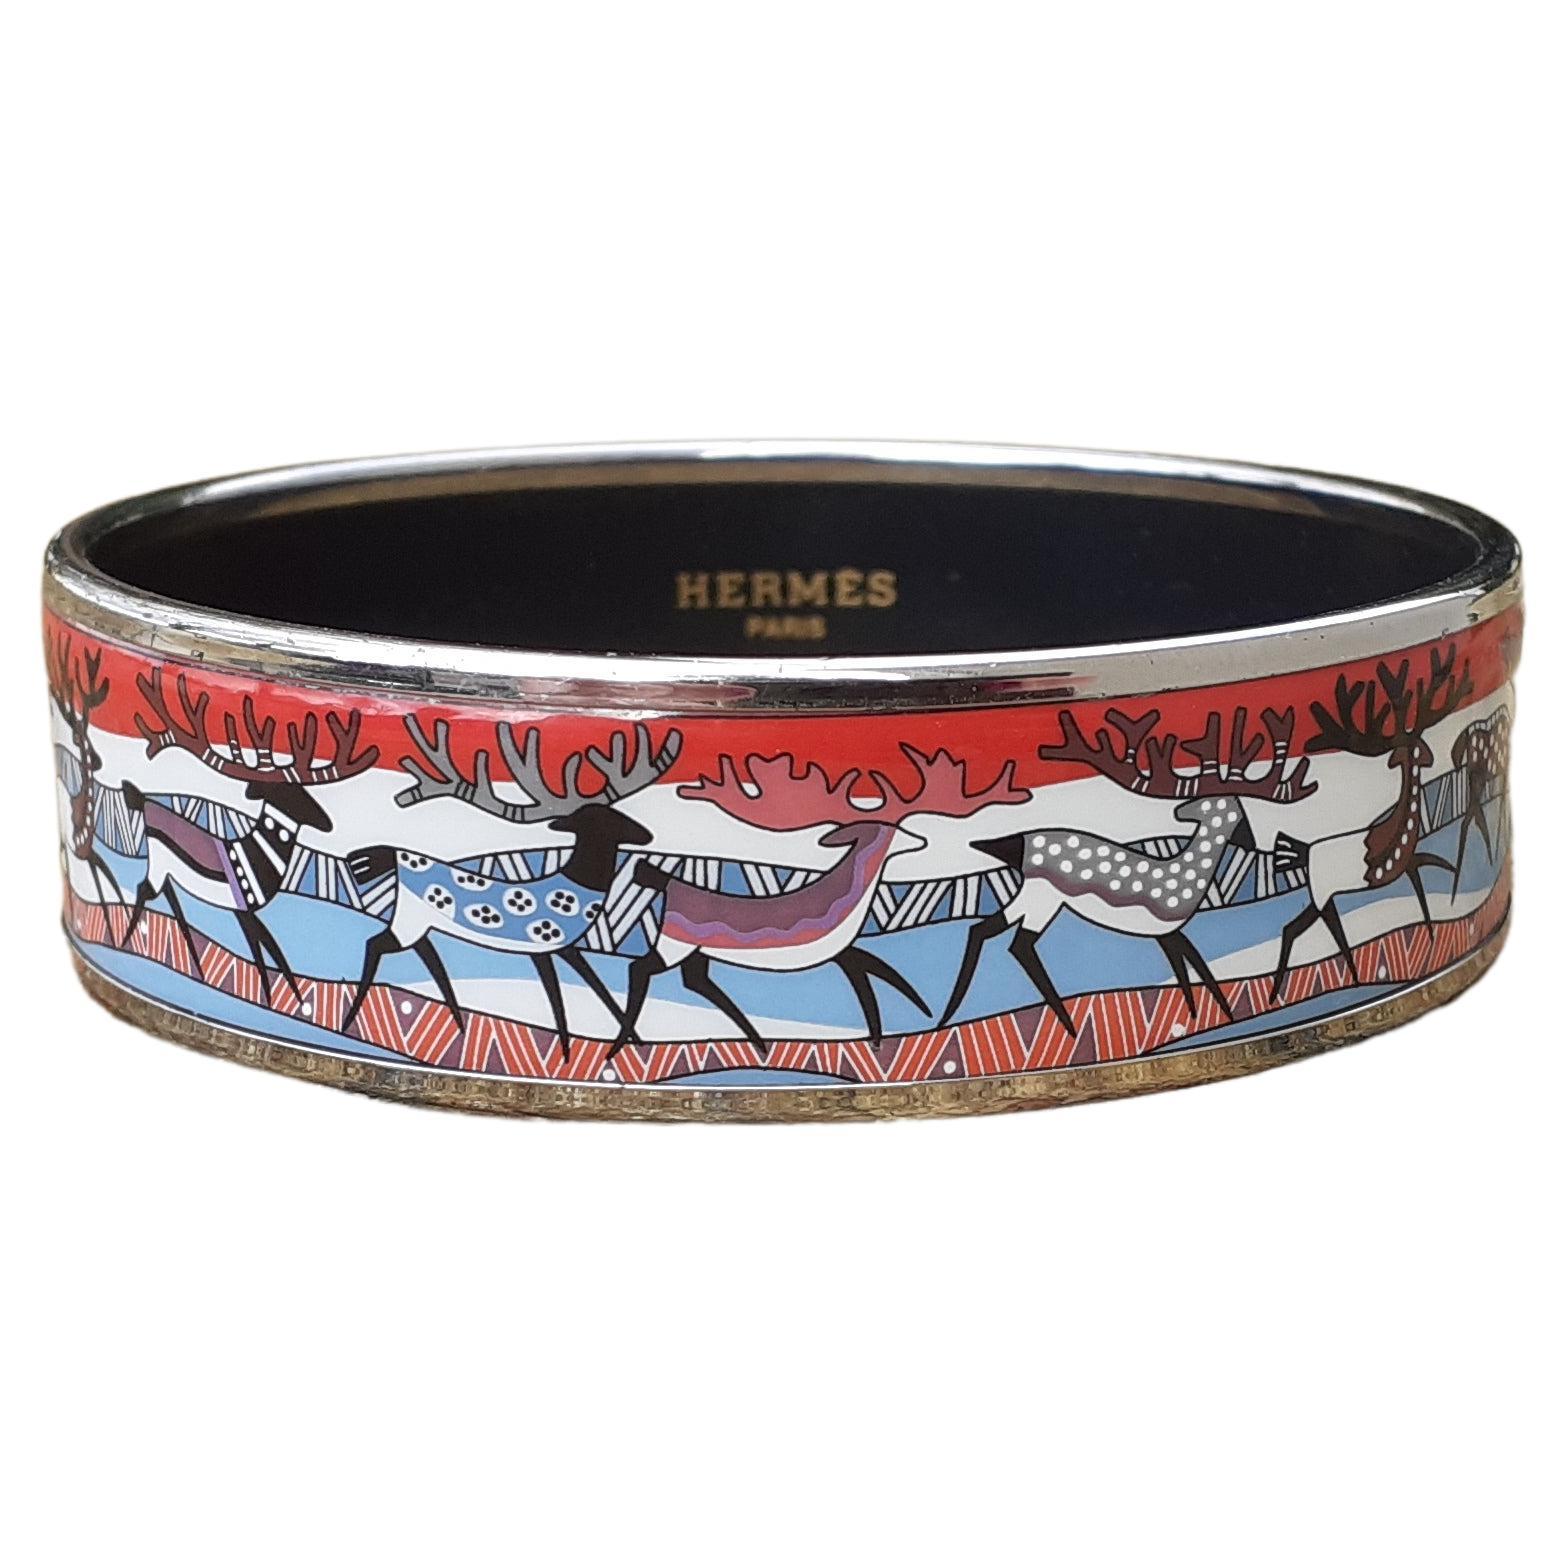 Lovely and Cute Authentic Hermès Bracelet

Print: Reindeers

 From 